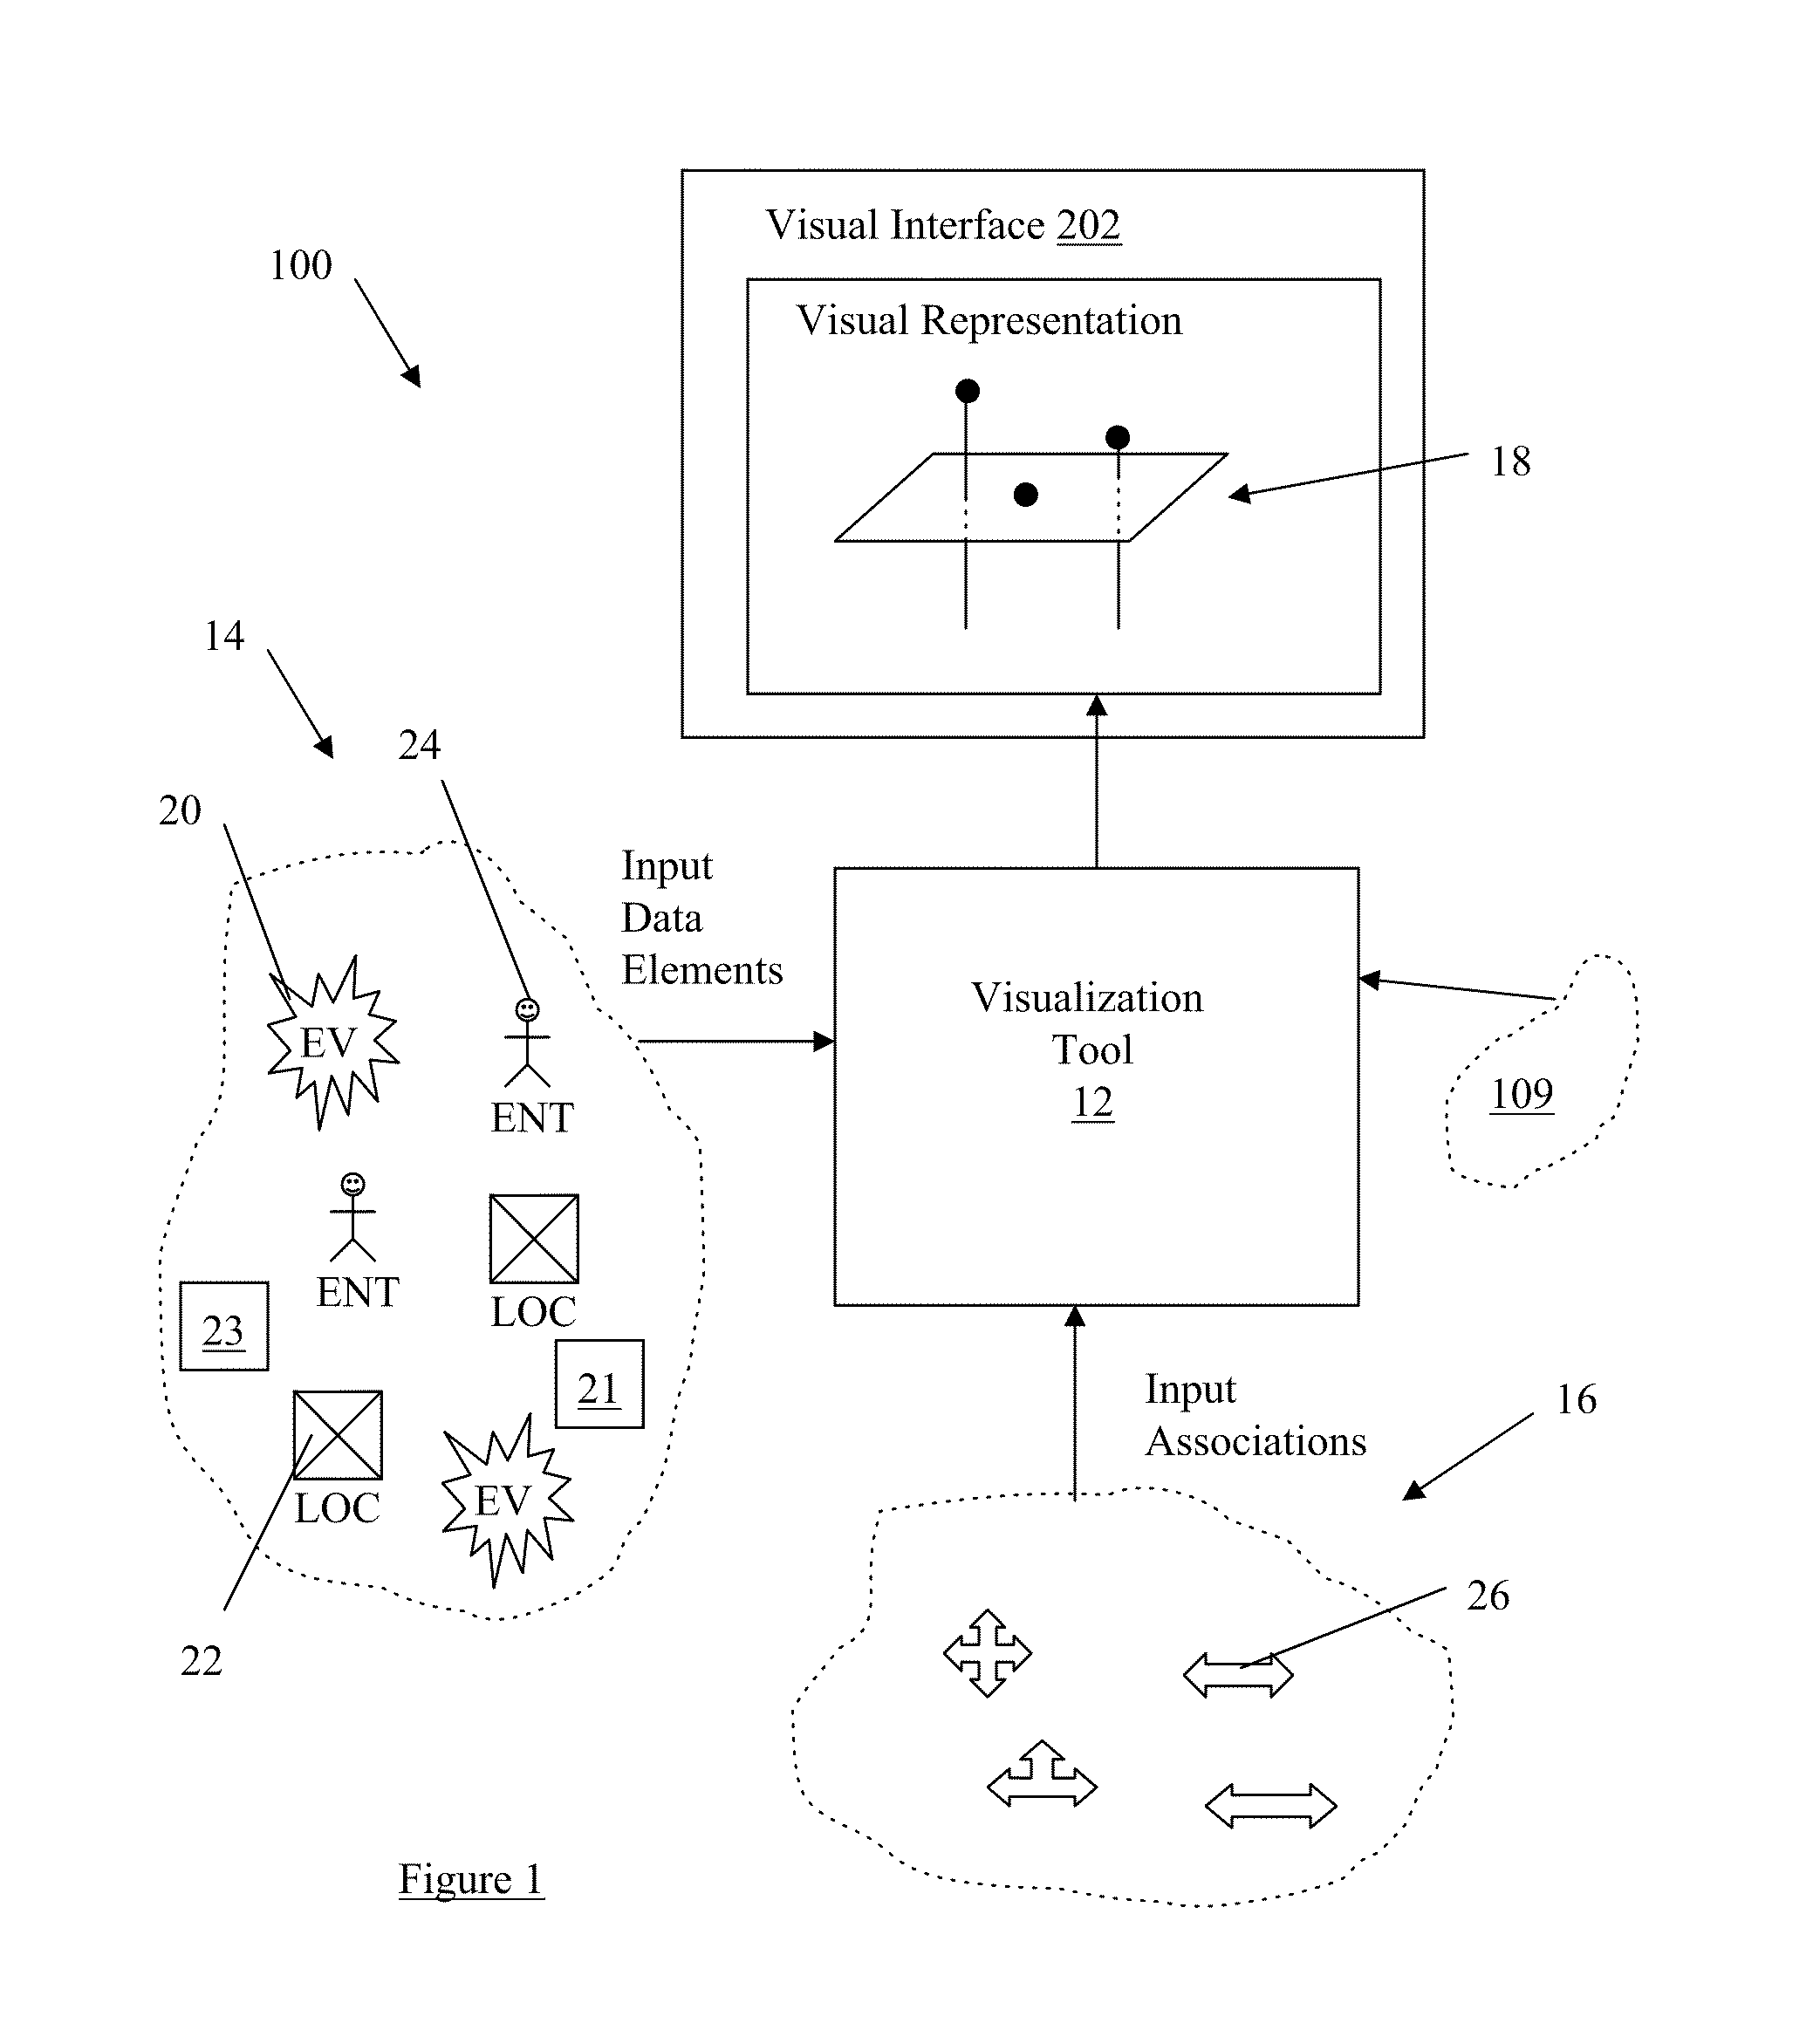 System and method for visualizing connected temporal and spatial information as an integrated visual representation on a user interface